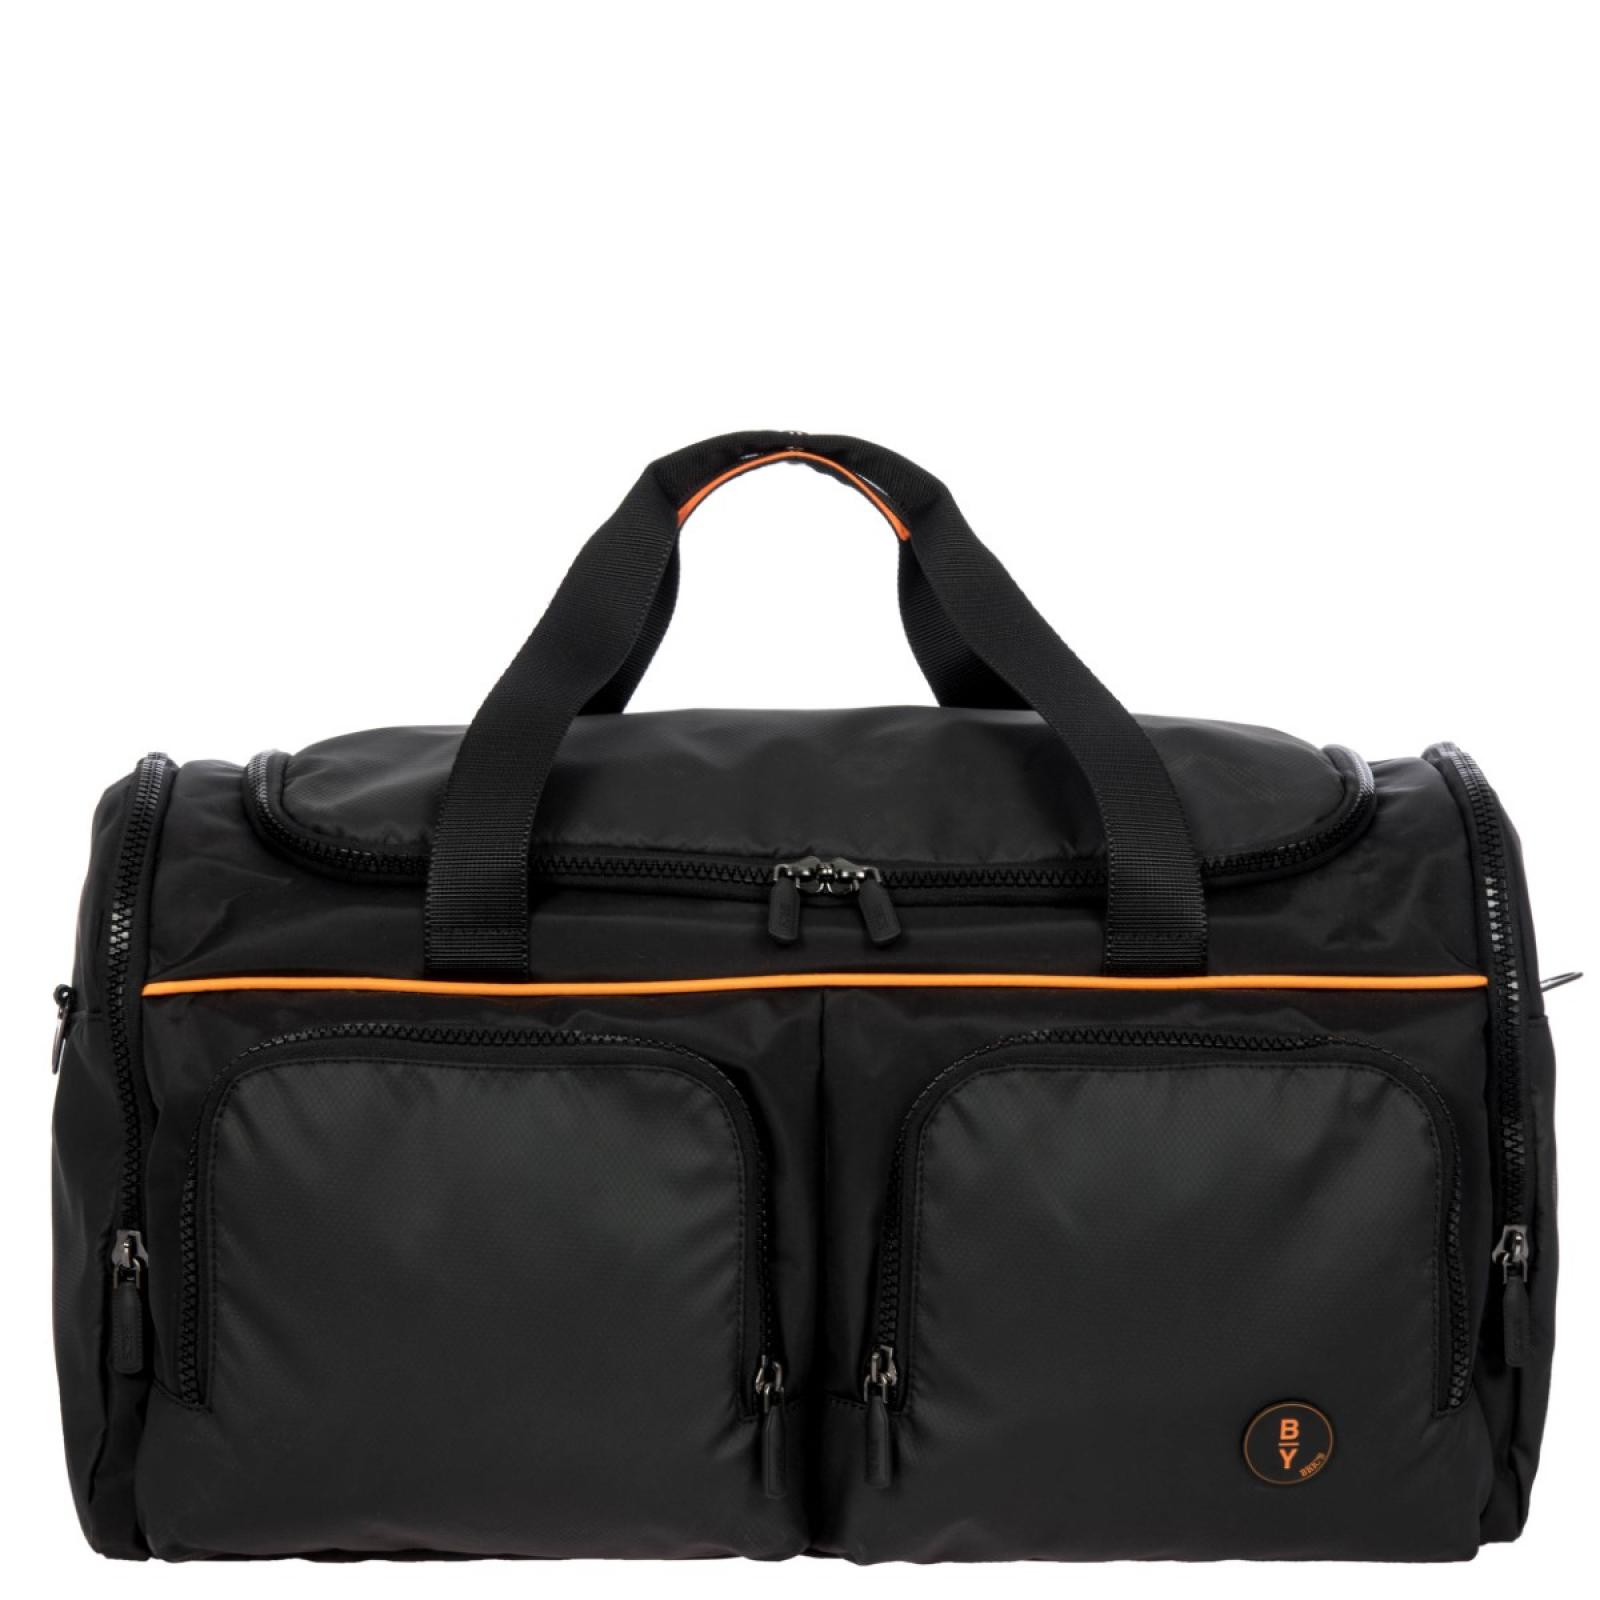 Bric’s: stylish suitcases, bags and travel acessories B|Y Medium Duffel Bag - 